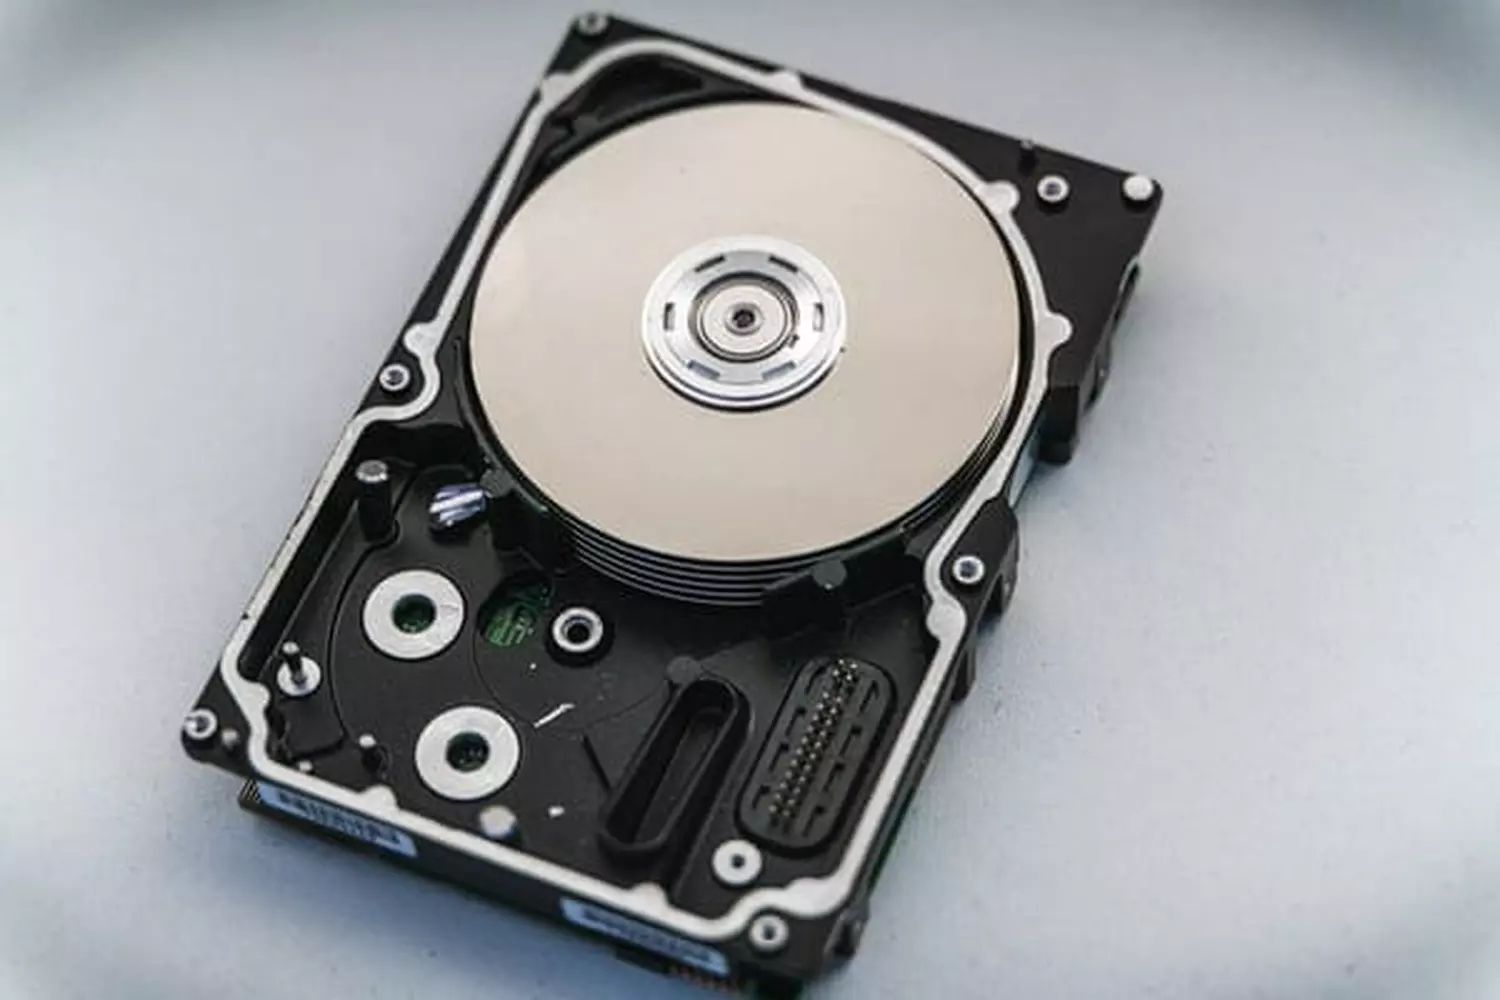 How To Increase Space On Hard Disk Drive